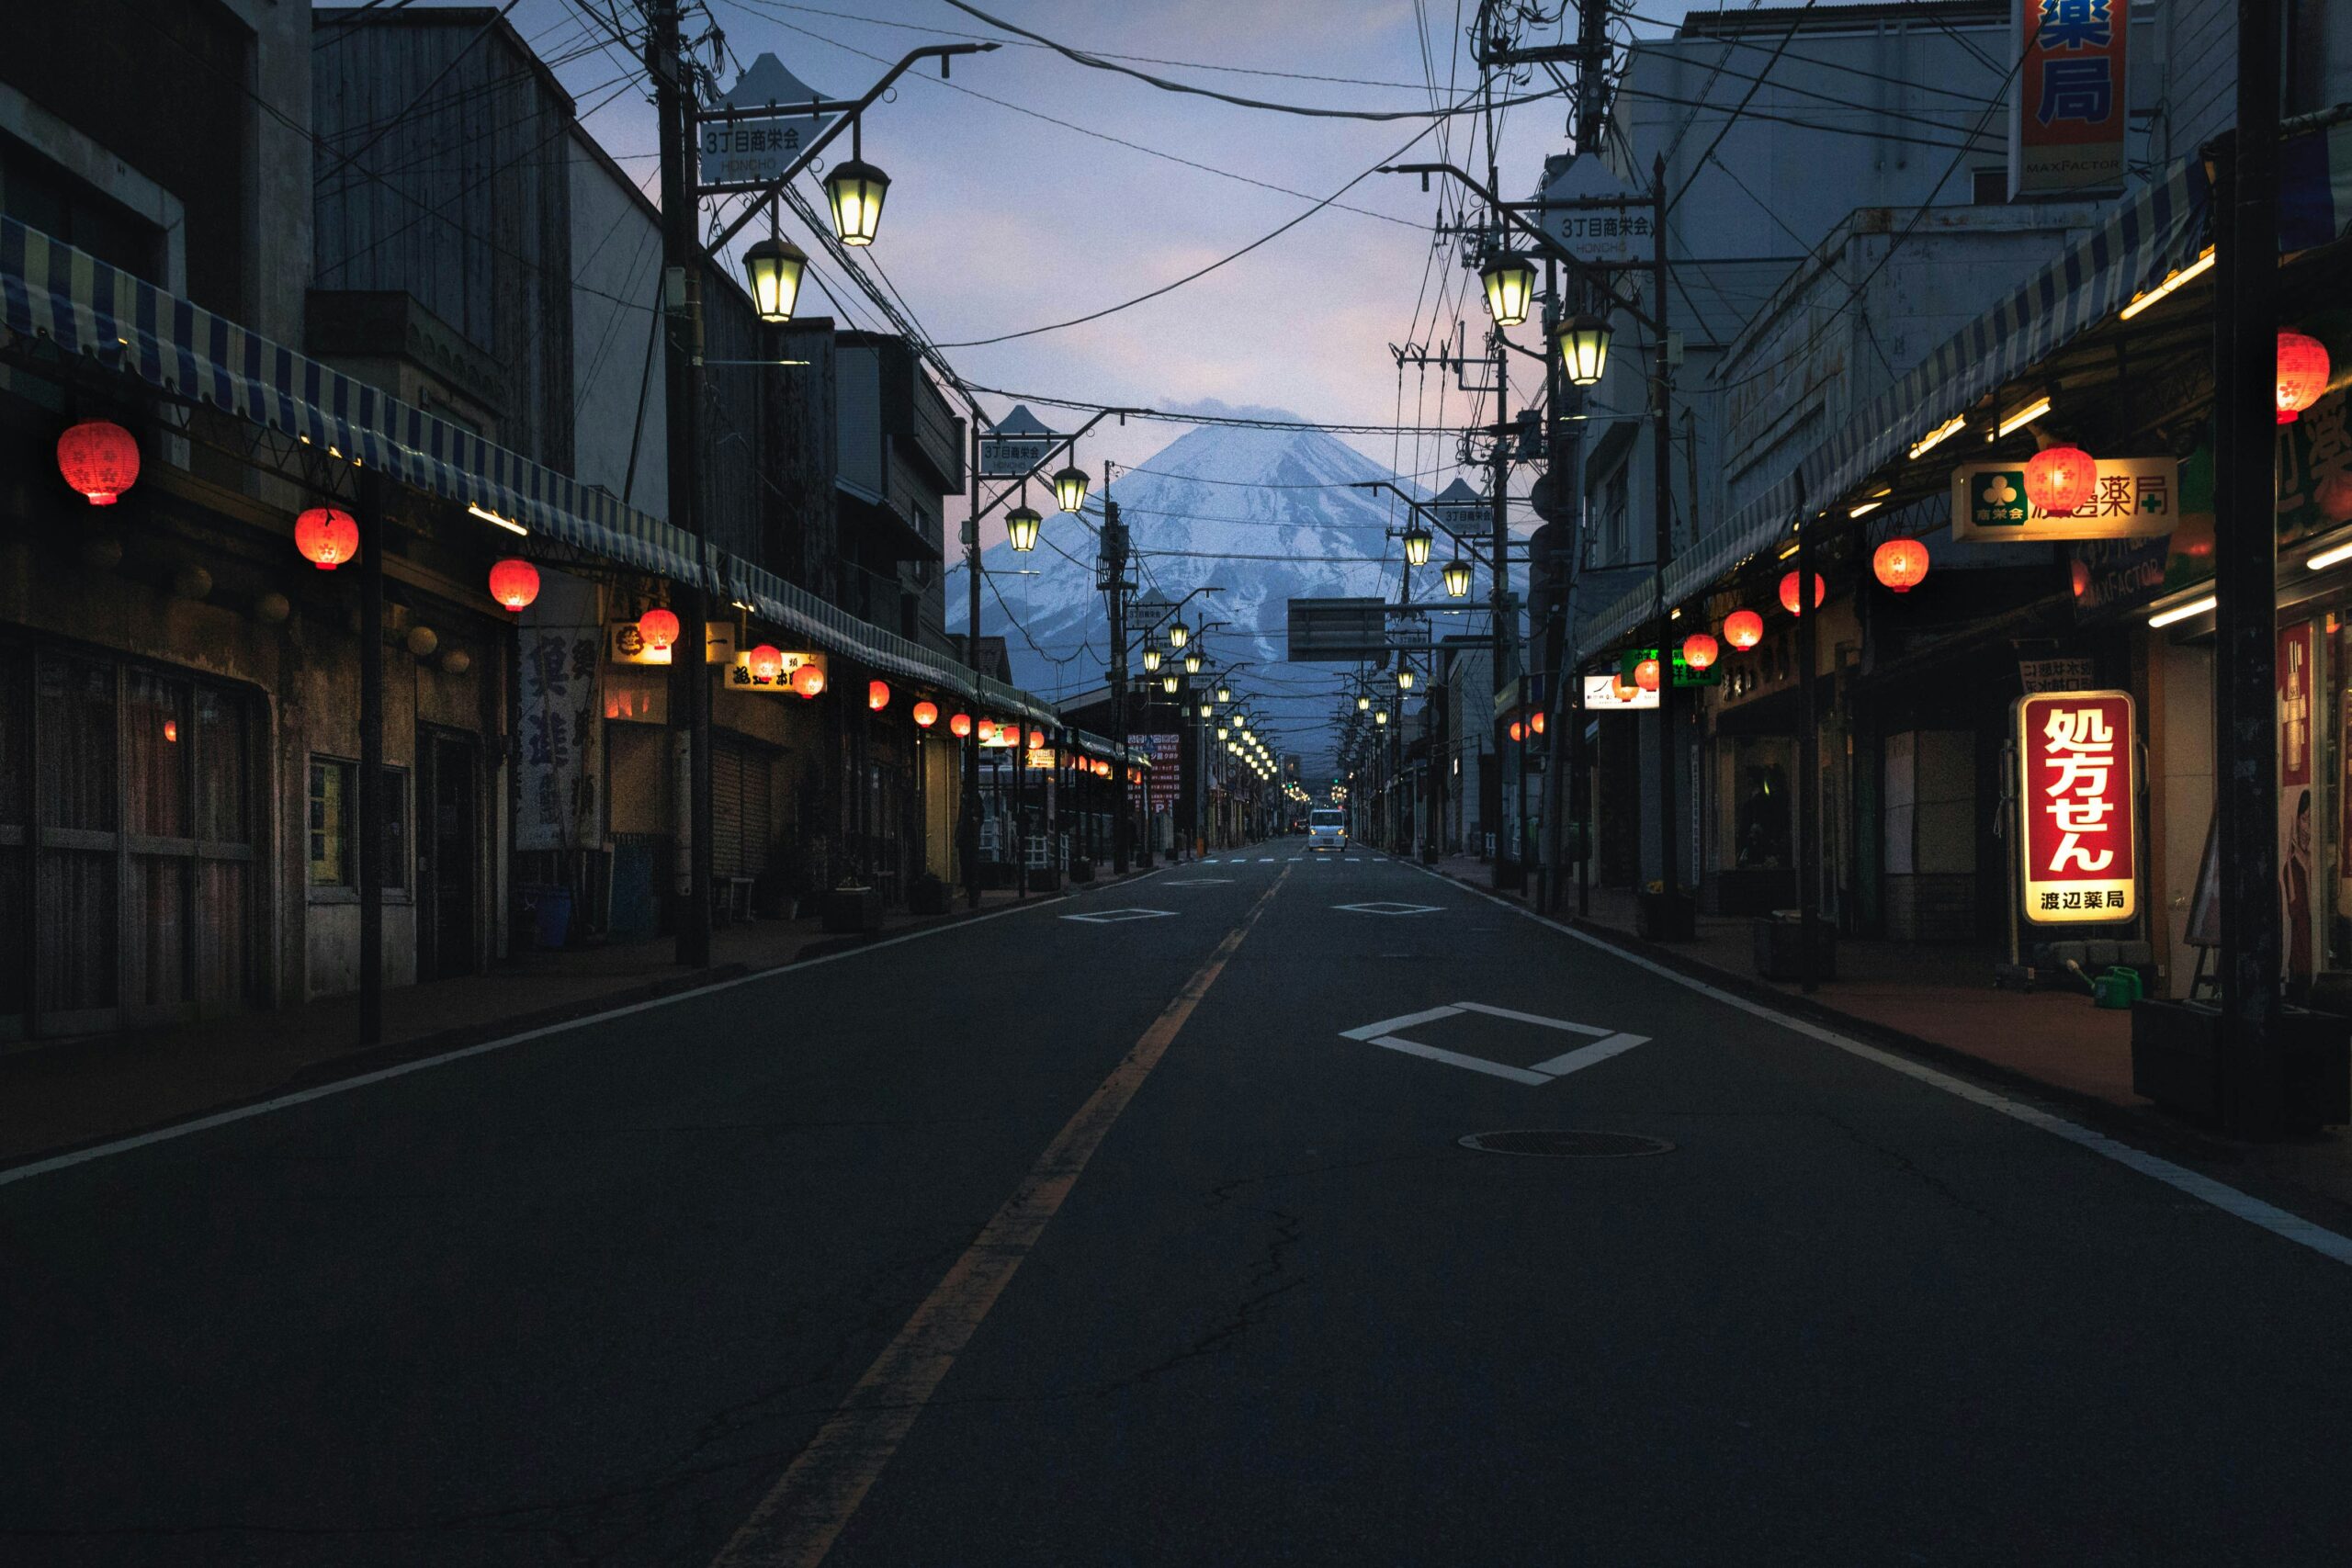 Learn about the issues that have led to a barrier at Mount Fuji. 
pictured: a town in the foreground of Mount Fuji